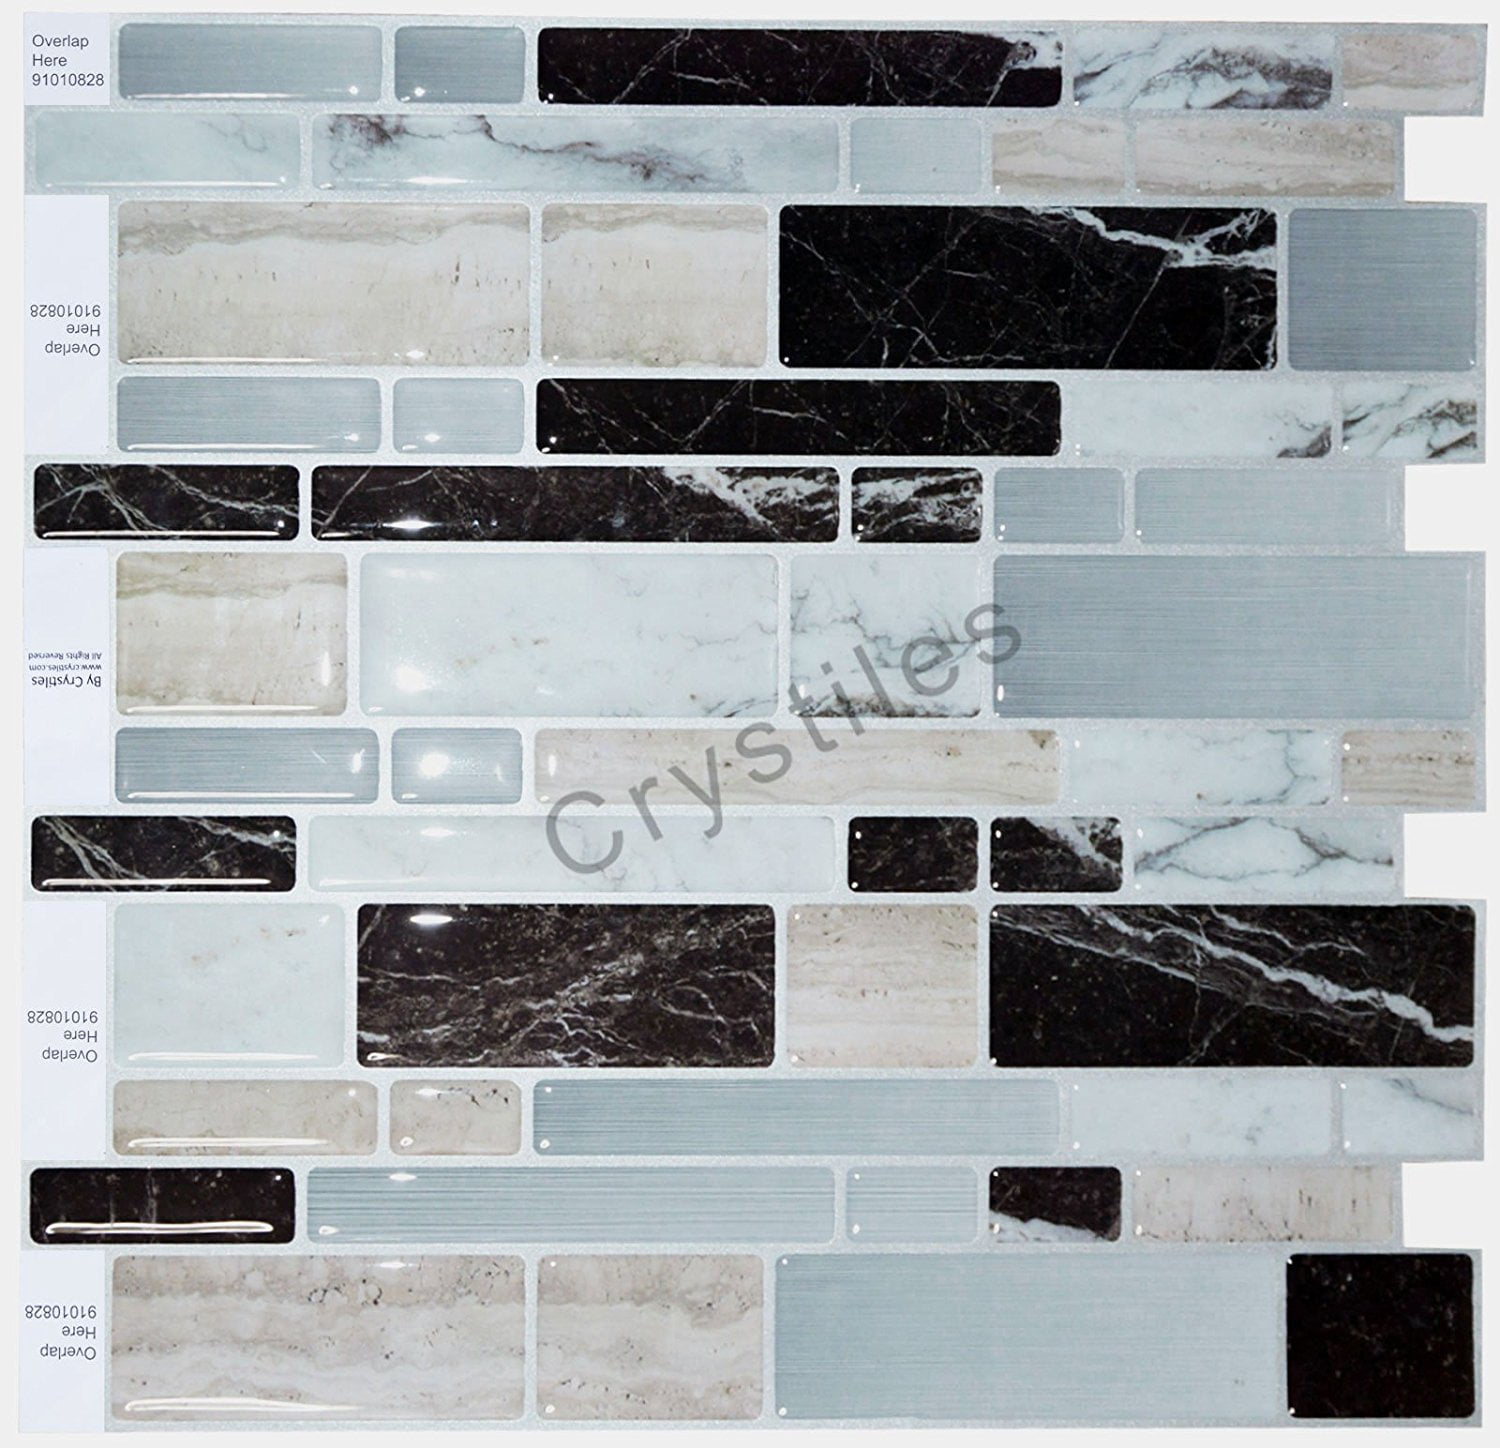 Crystiles® Peel and Stick Self-Adhesive Stick-On Vinyl Wall Tile  Backsplash,Multi-Color Marble, Item# 91010828, 10” X 10” Each, 6 Sheets Pack